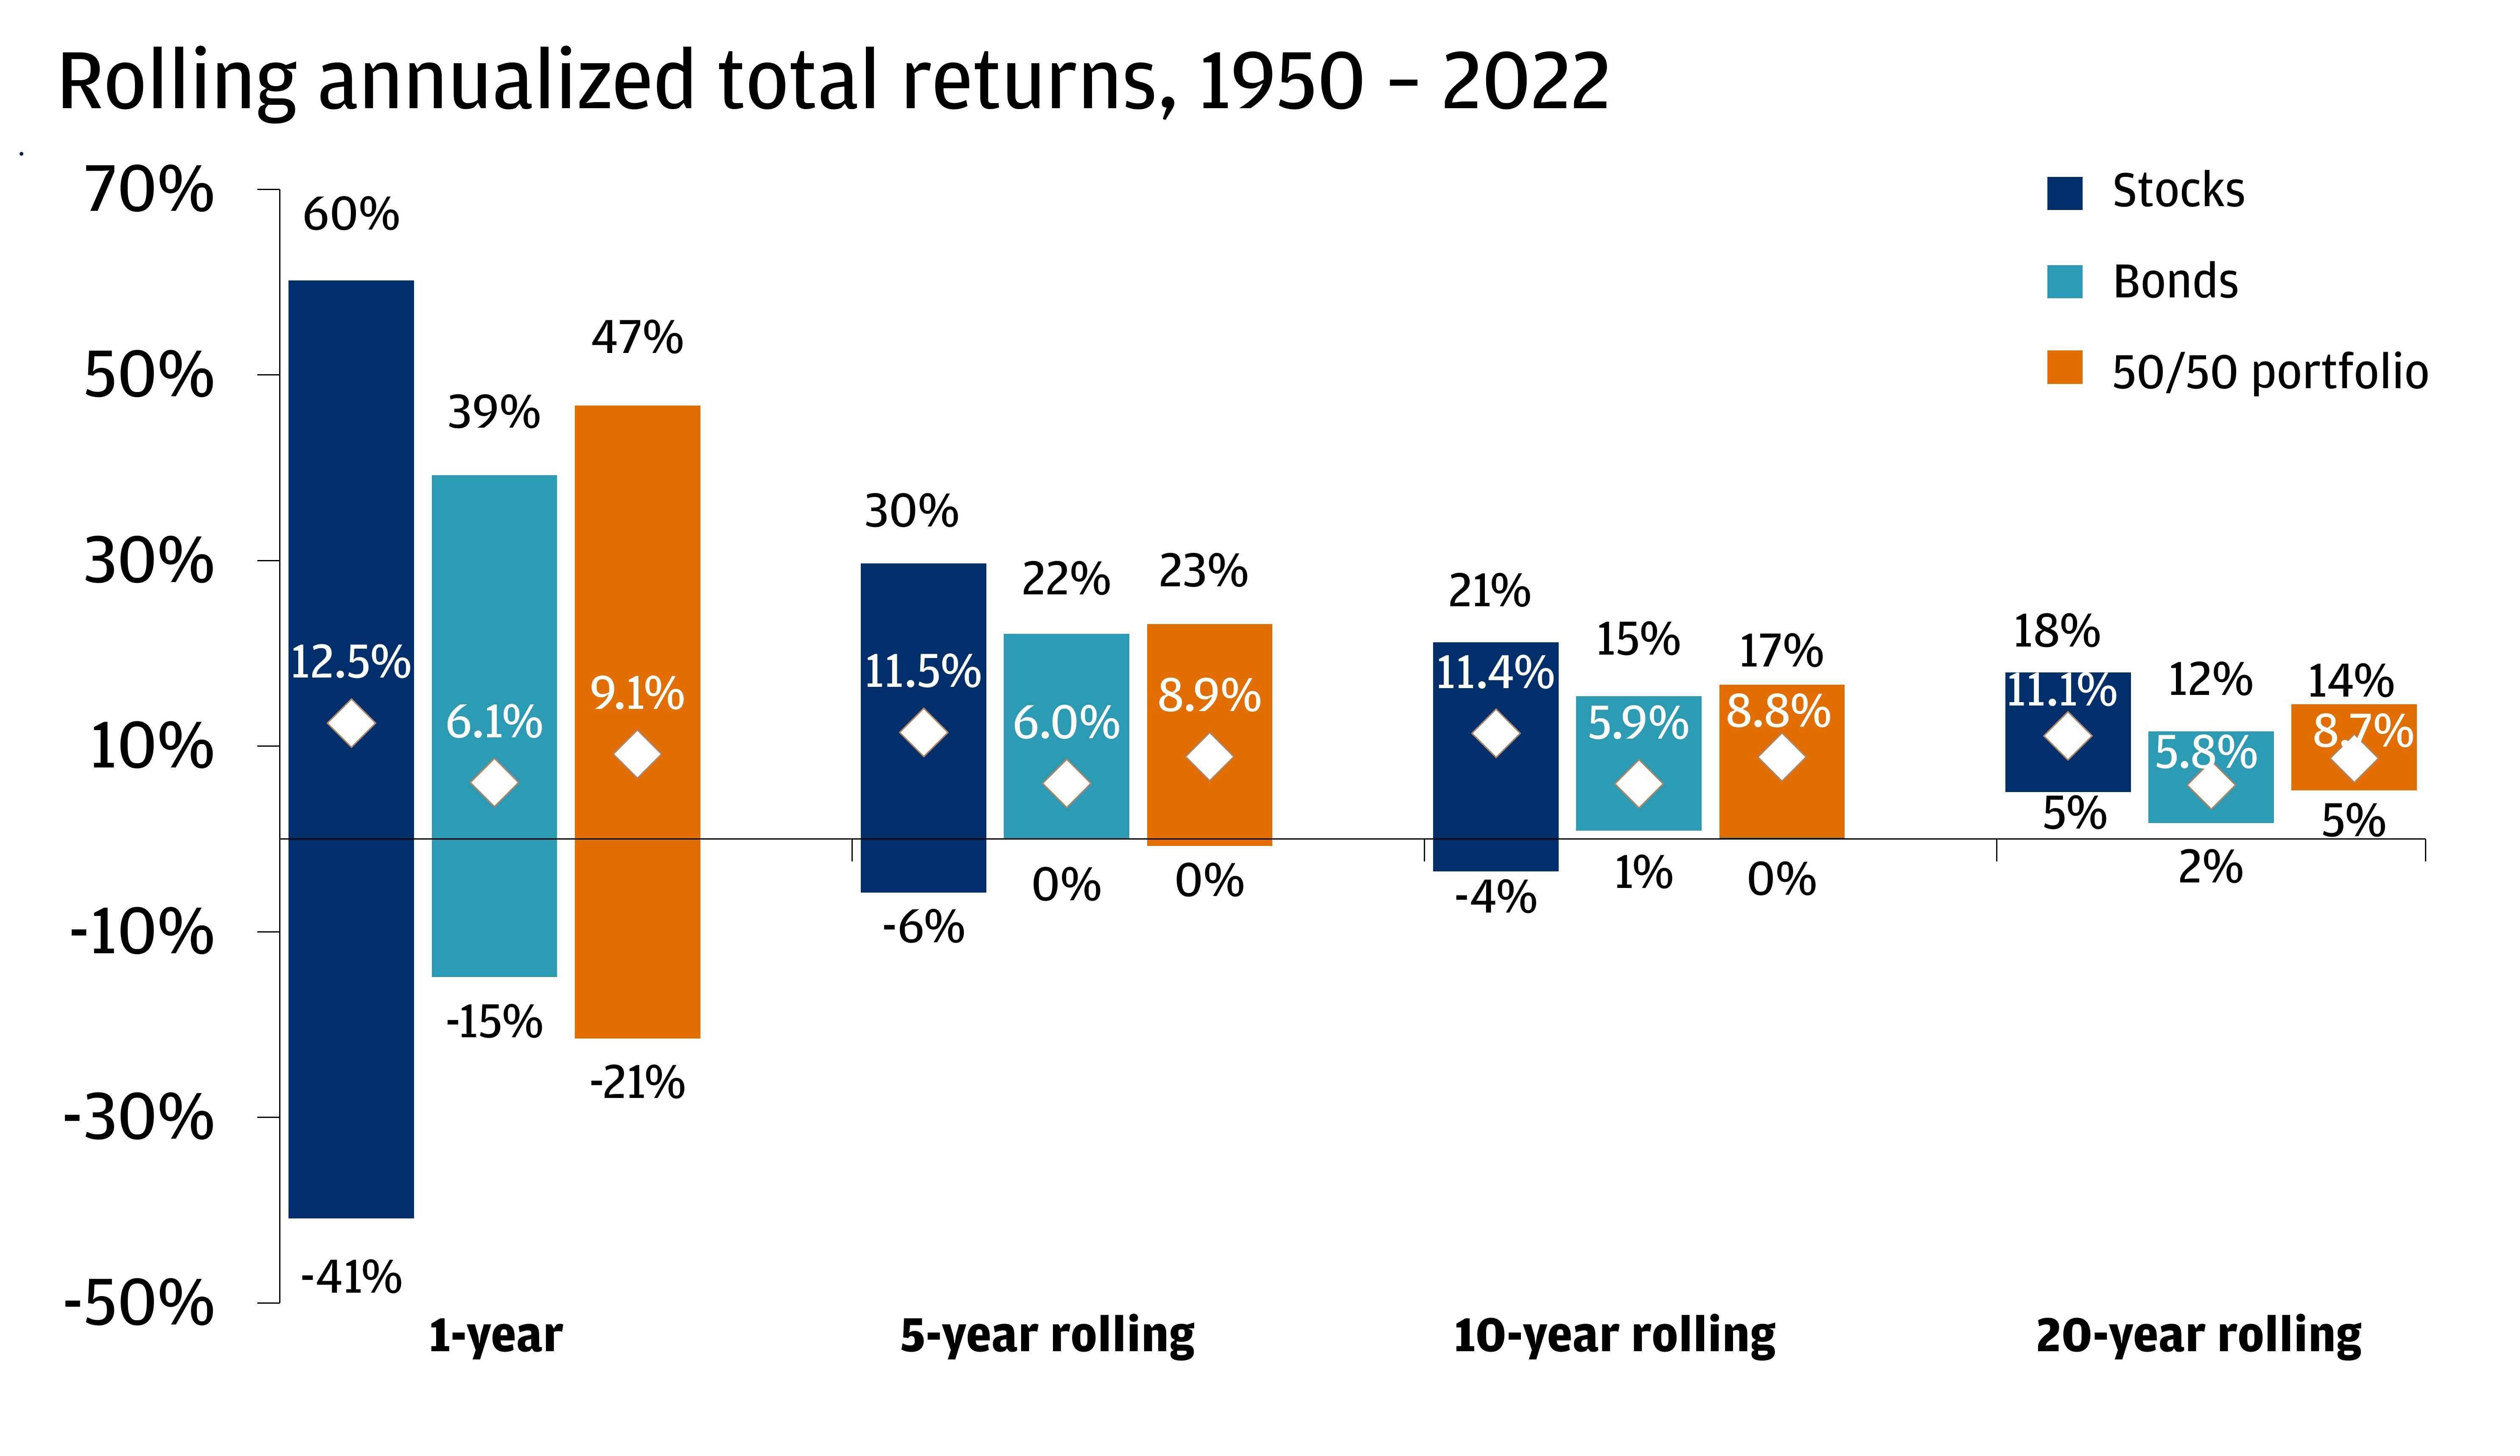 This chart shows rolling annualized total returns from 1950 until 2022, on a 1-year, 5-year rolling, 10-year rolling and 20-year rolling basis, for stocks, bonds and 50/50 portfolio.